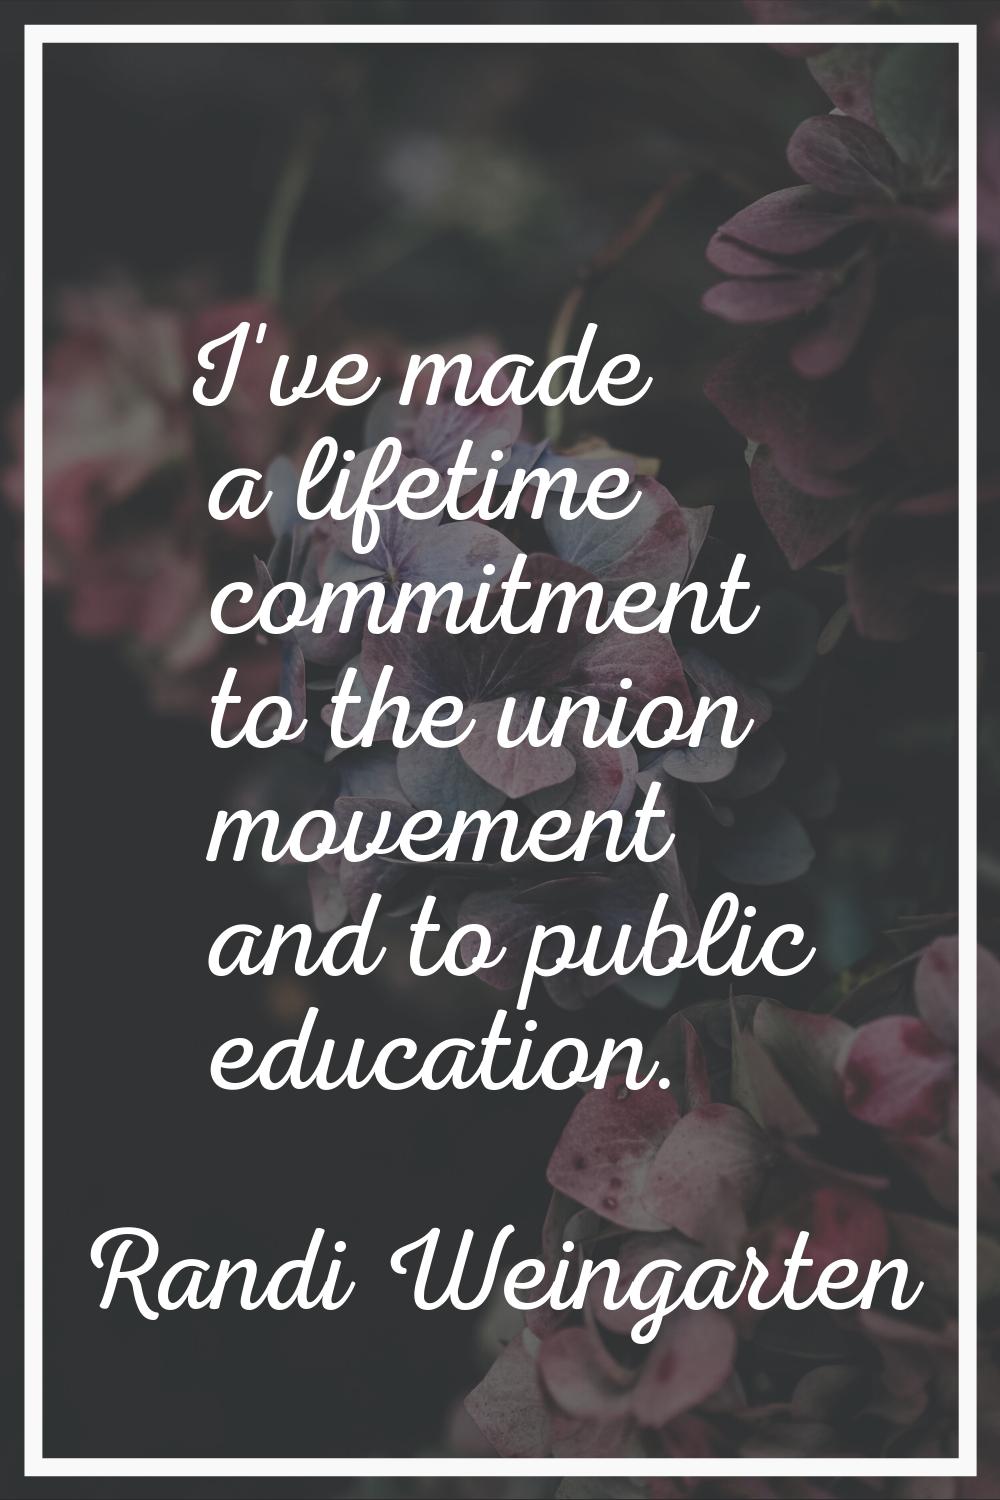 I've made a lifetime commitment to the union movement and to public education.